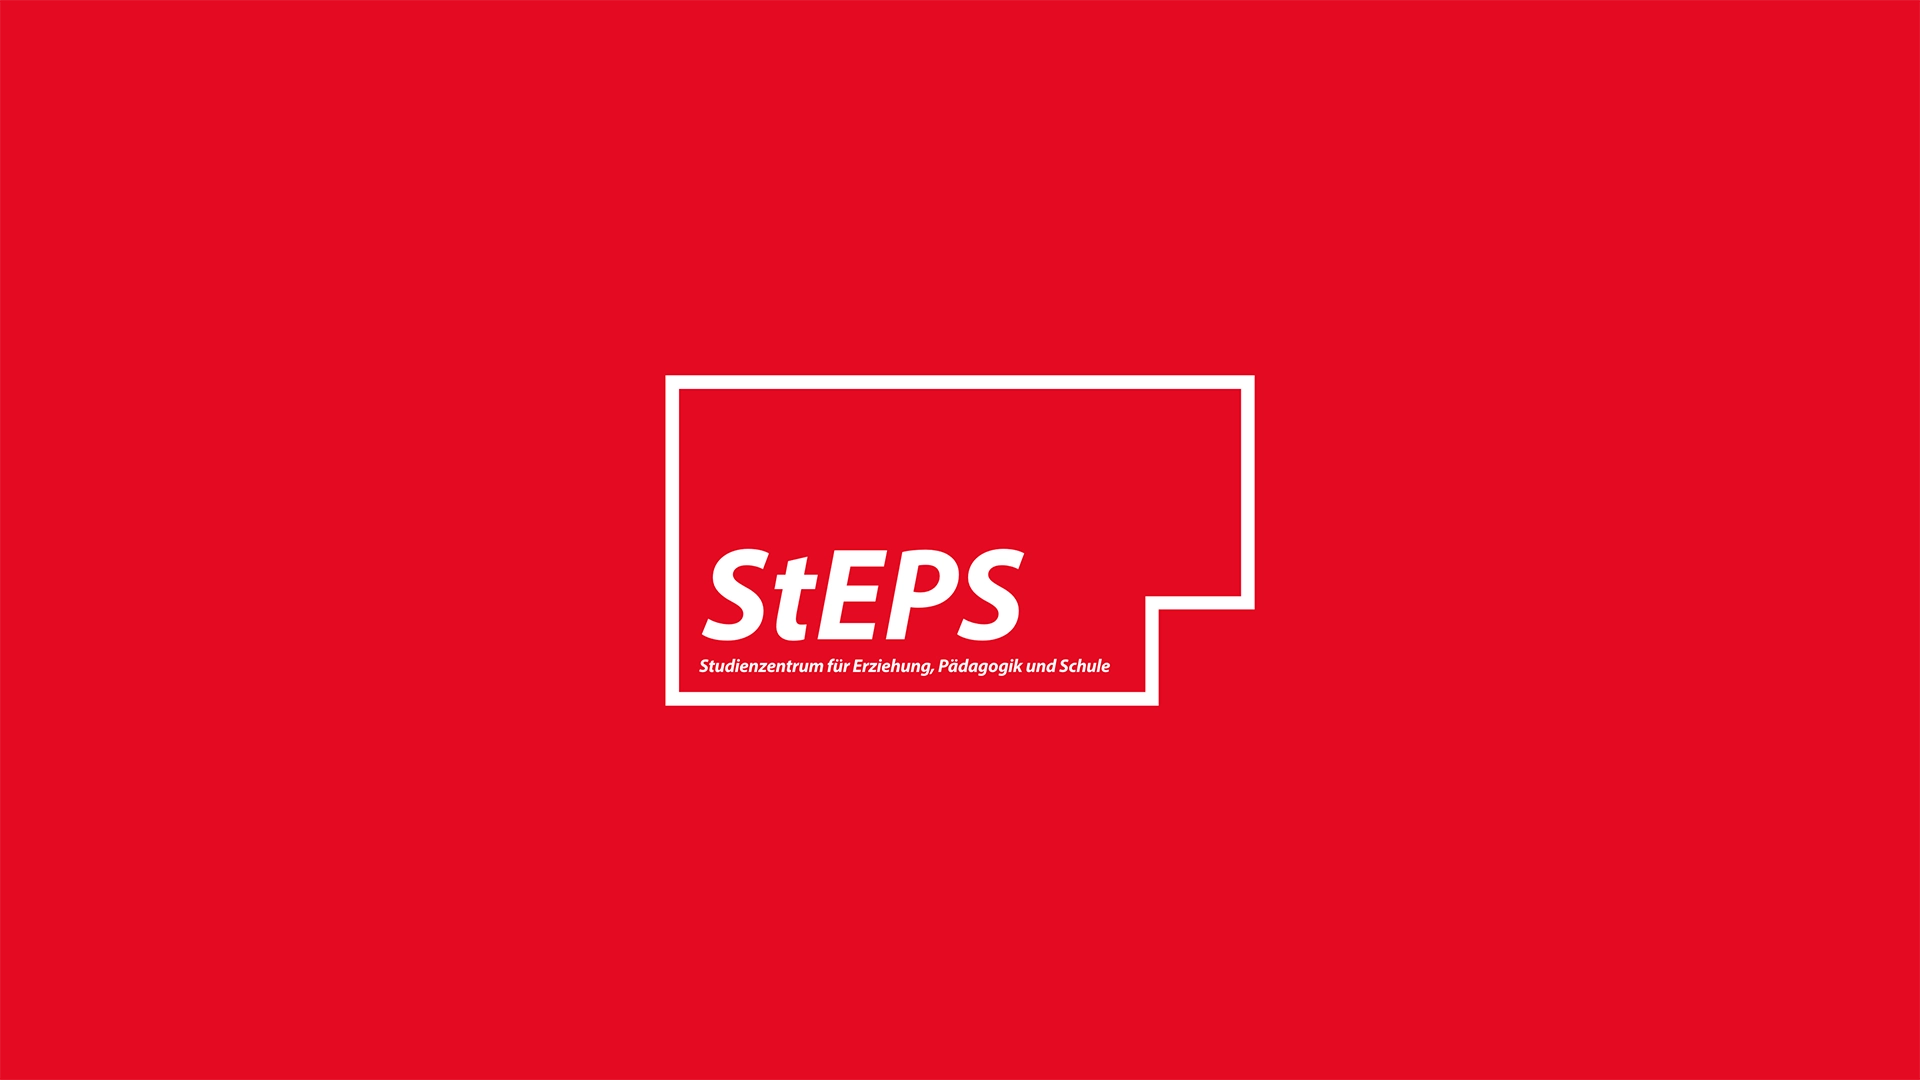 One picture shows the large red logo of StEPS, the in-service training program of the Berlin Senate Department for Education, Youth and Sports.